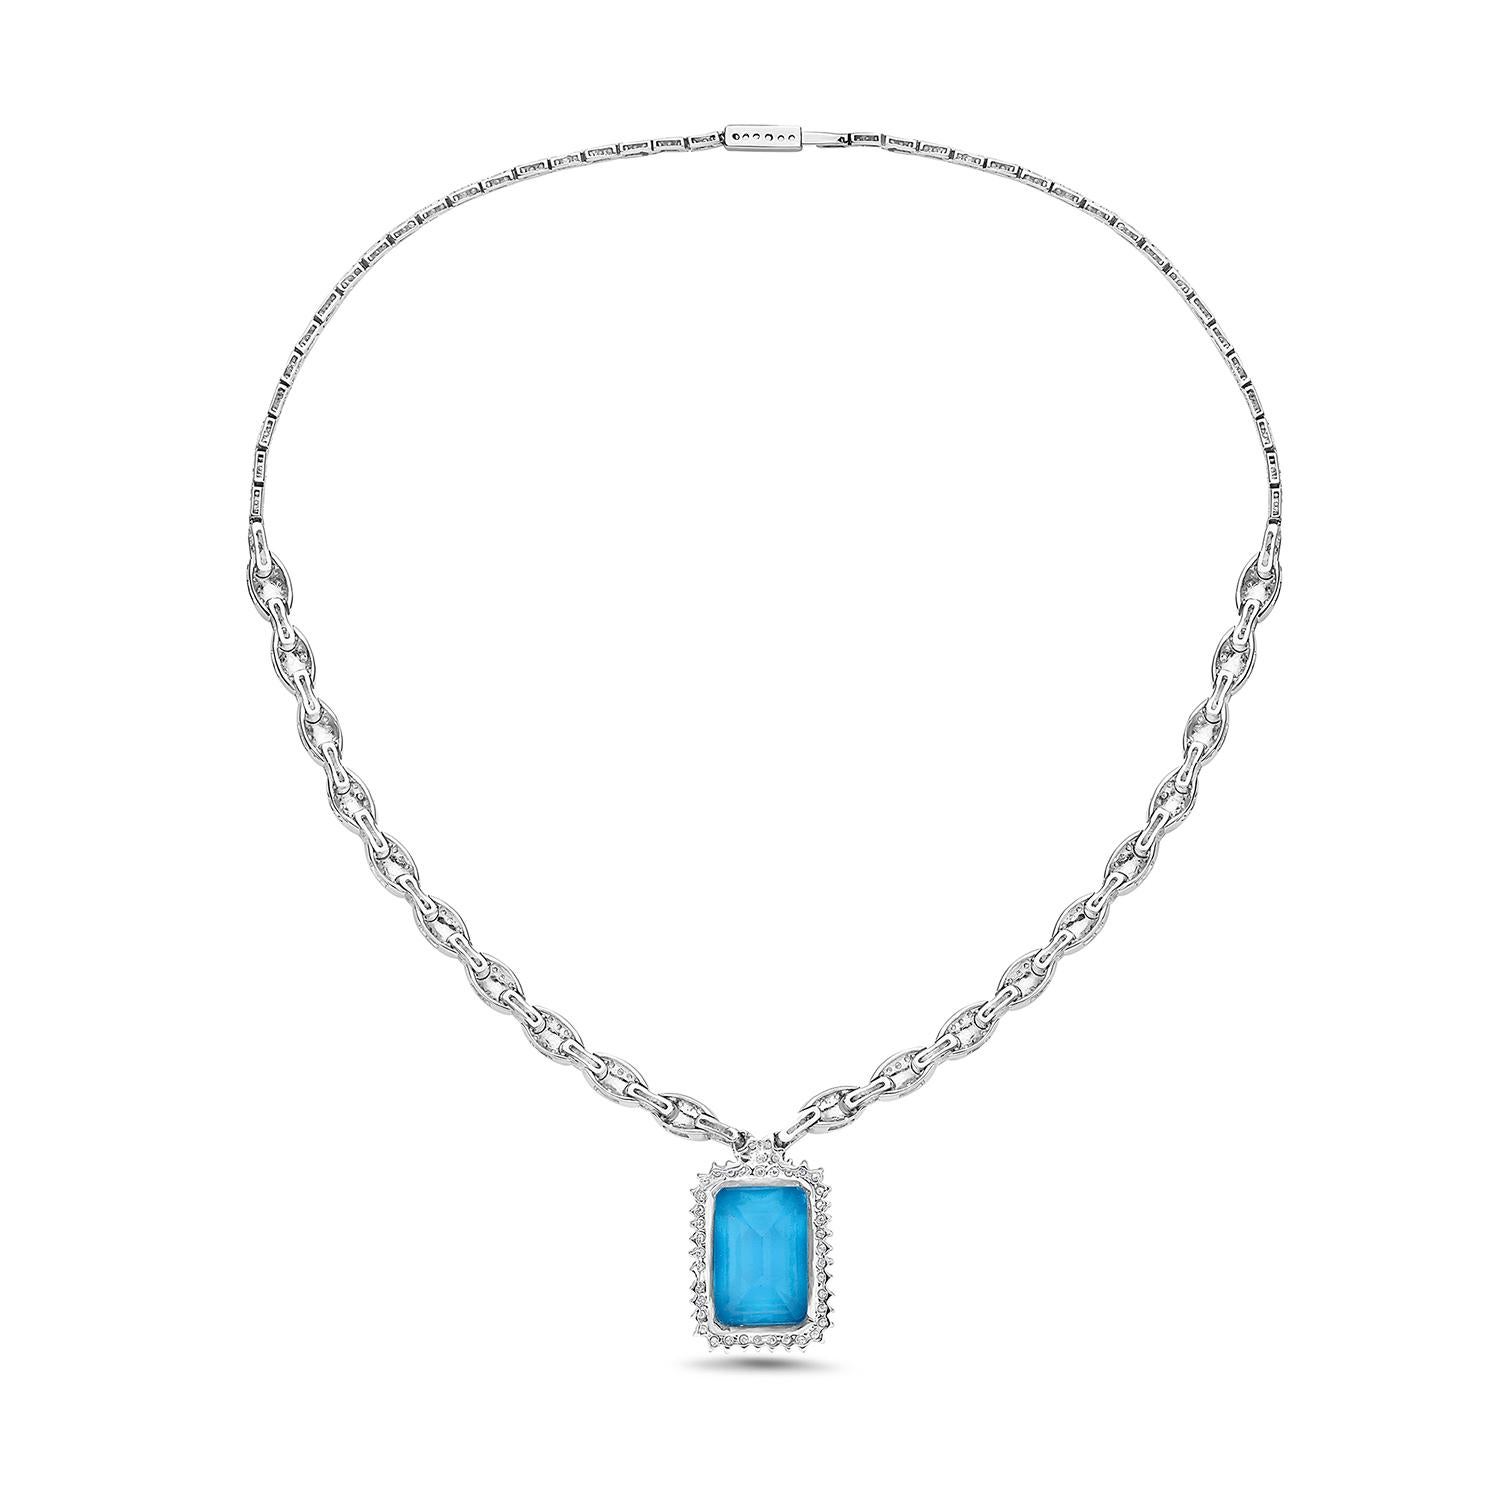 Contemporary Octogen Cut Blue Topaz Necklace Linked with Pave Diamonds Made in 18k White Gold For Sale